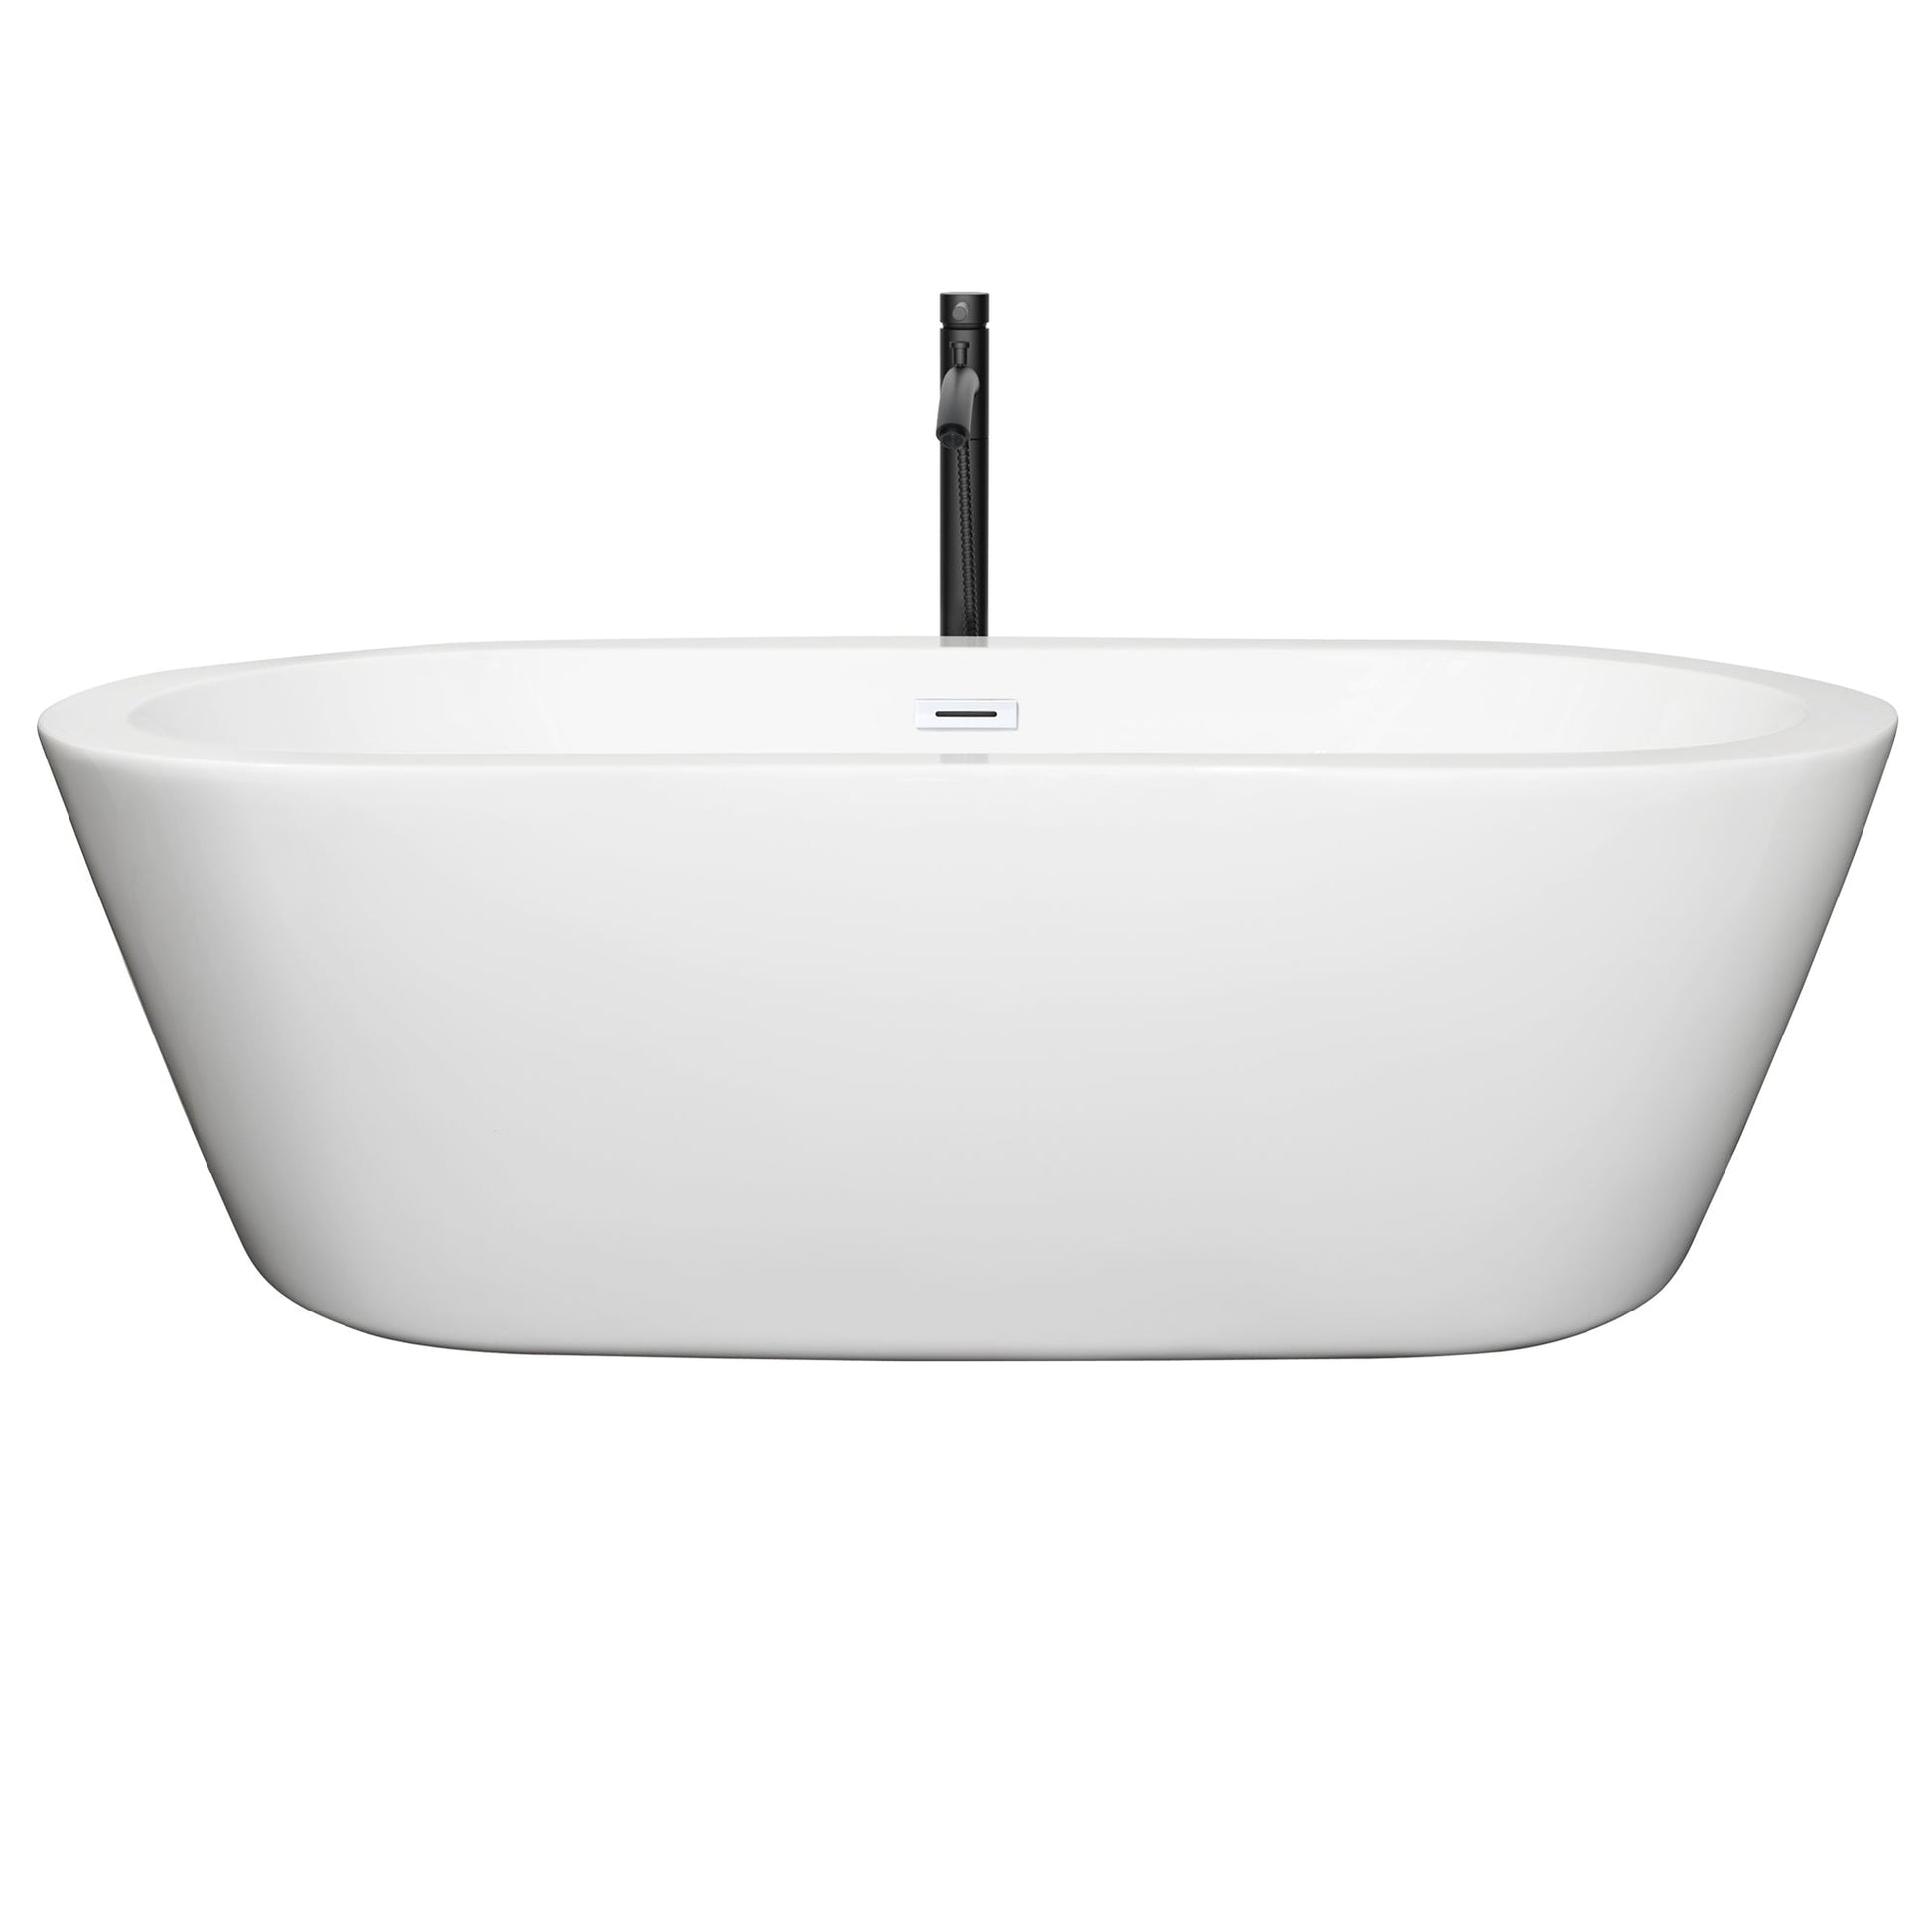 Wyndham Collection Mermaid 71" Freestanding Bathtub in White With Shiny White Trim and Floor Mounted Faucet in Matte Black